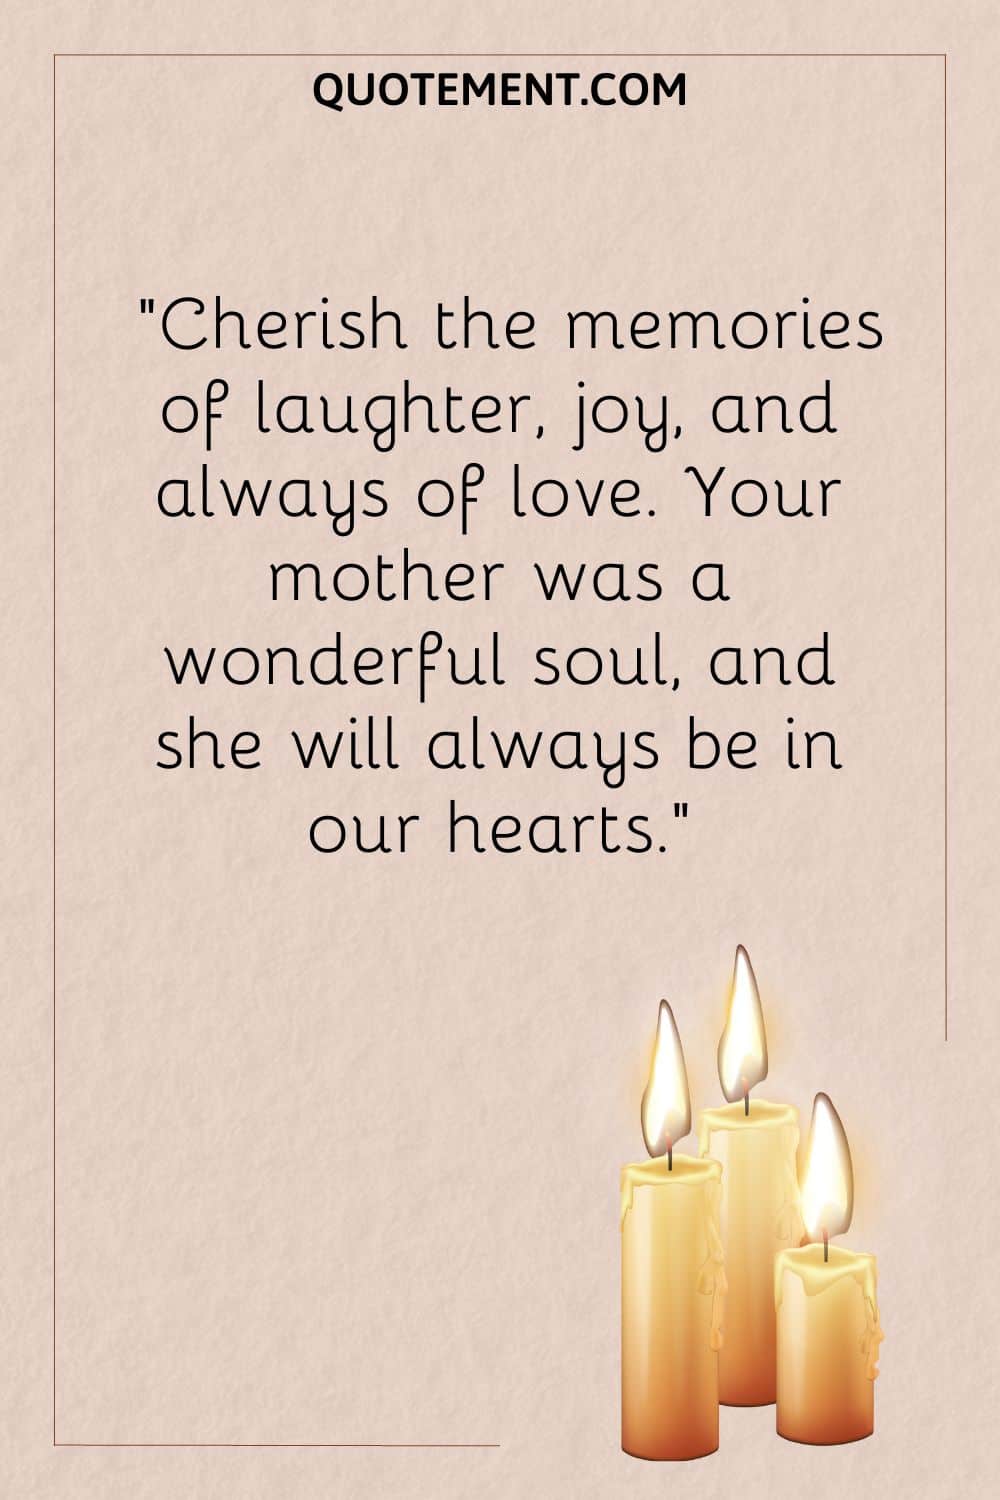 burning candles image representing loss of a mother message
